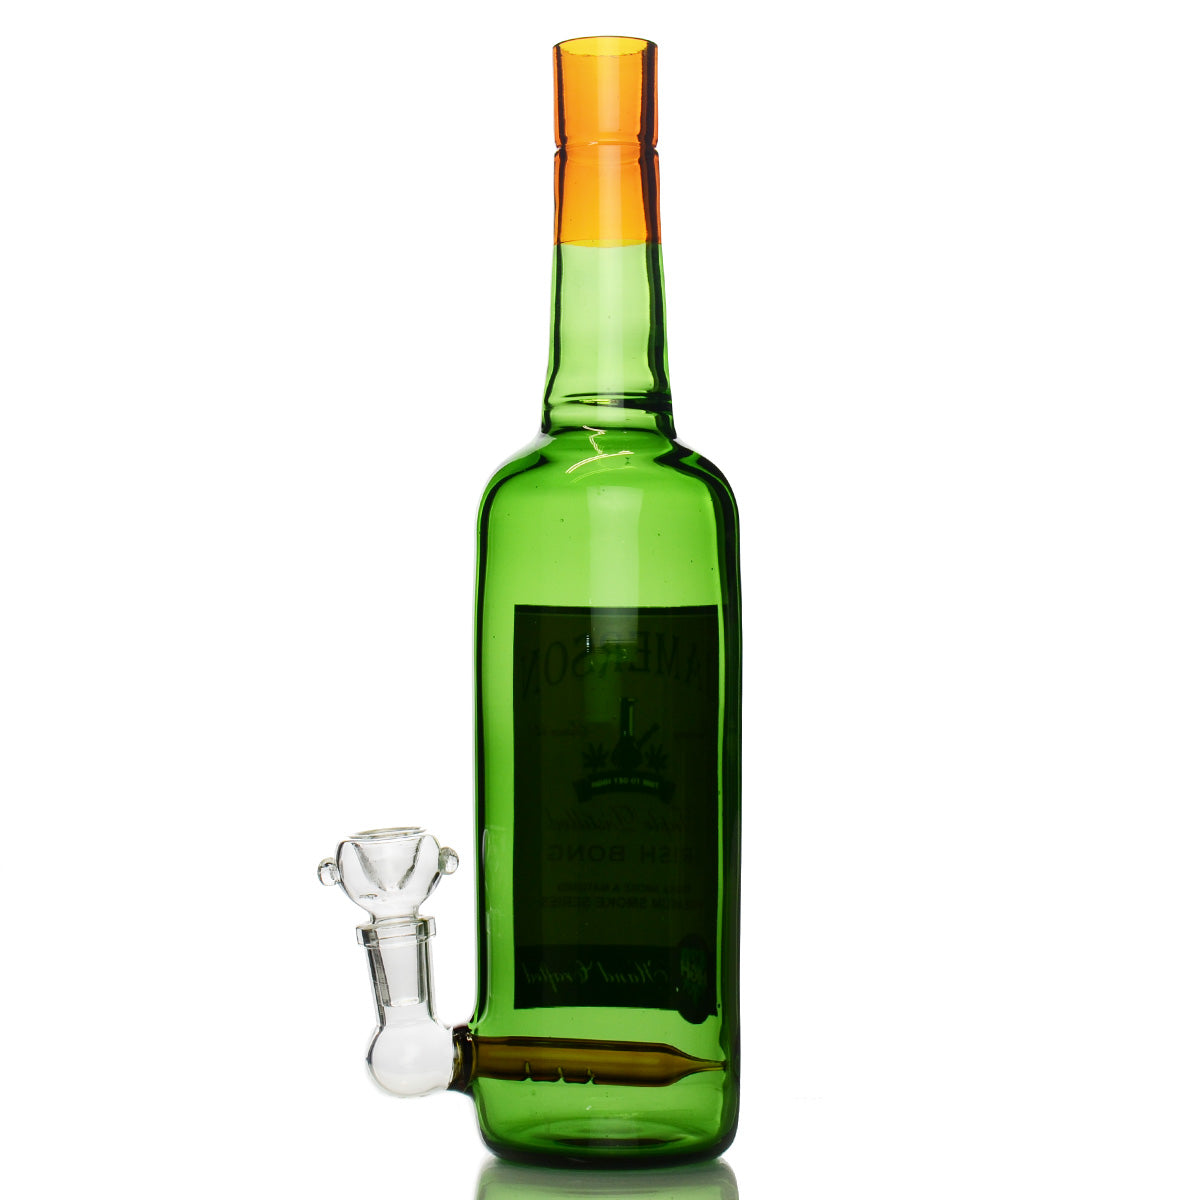 12" Jamerson Liquor Bottle 420 High with 14mm Male Bowl and 14mm Male Banger